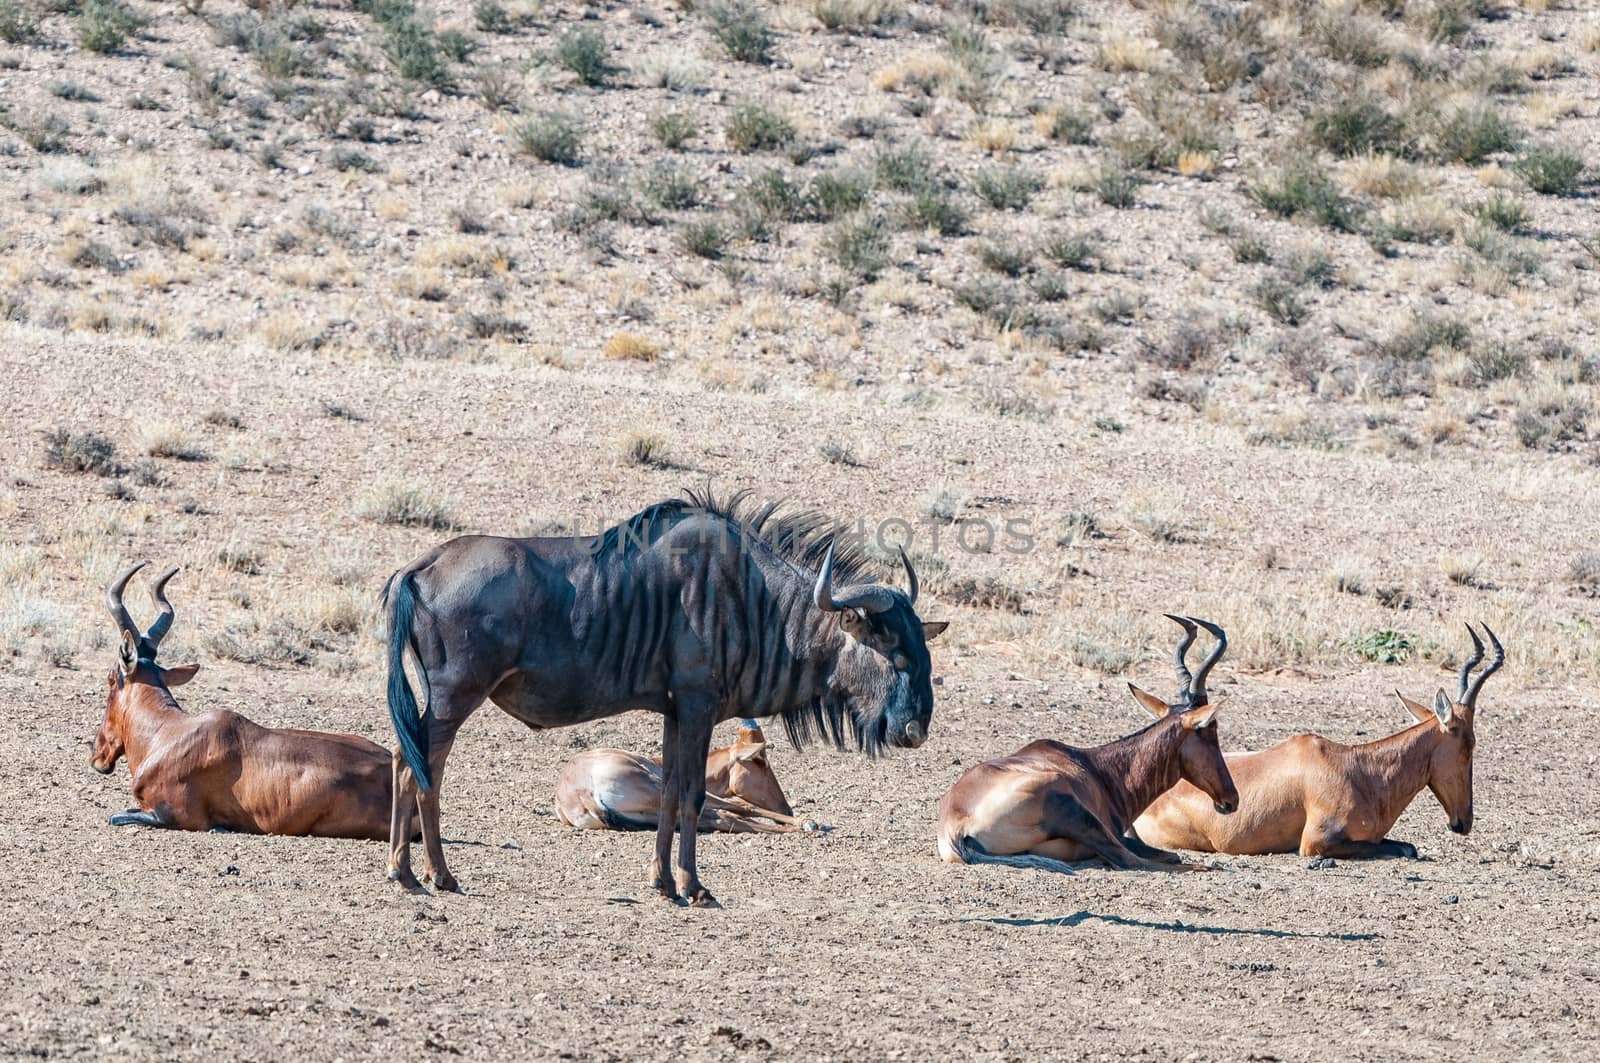 Blue wildebeest and red hartebeest in the Kgalagadi by dpreezg